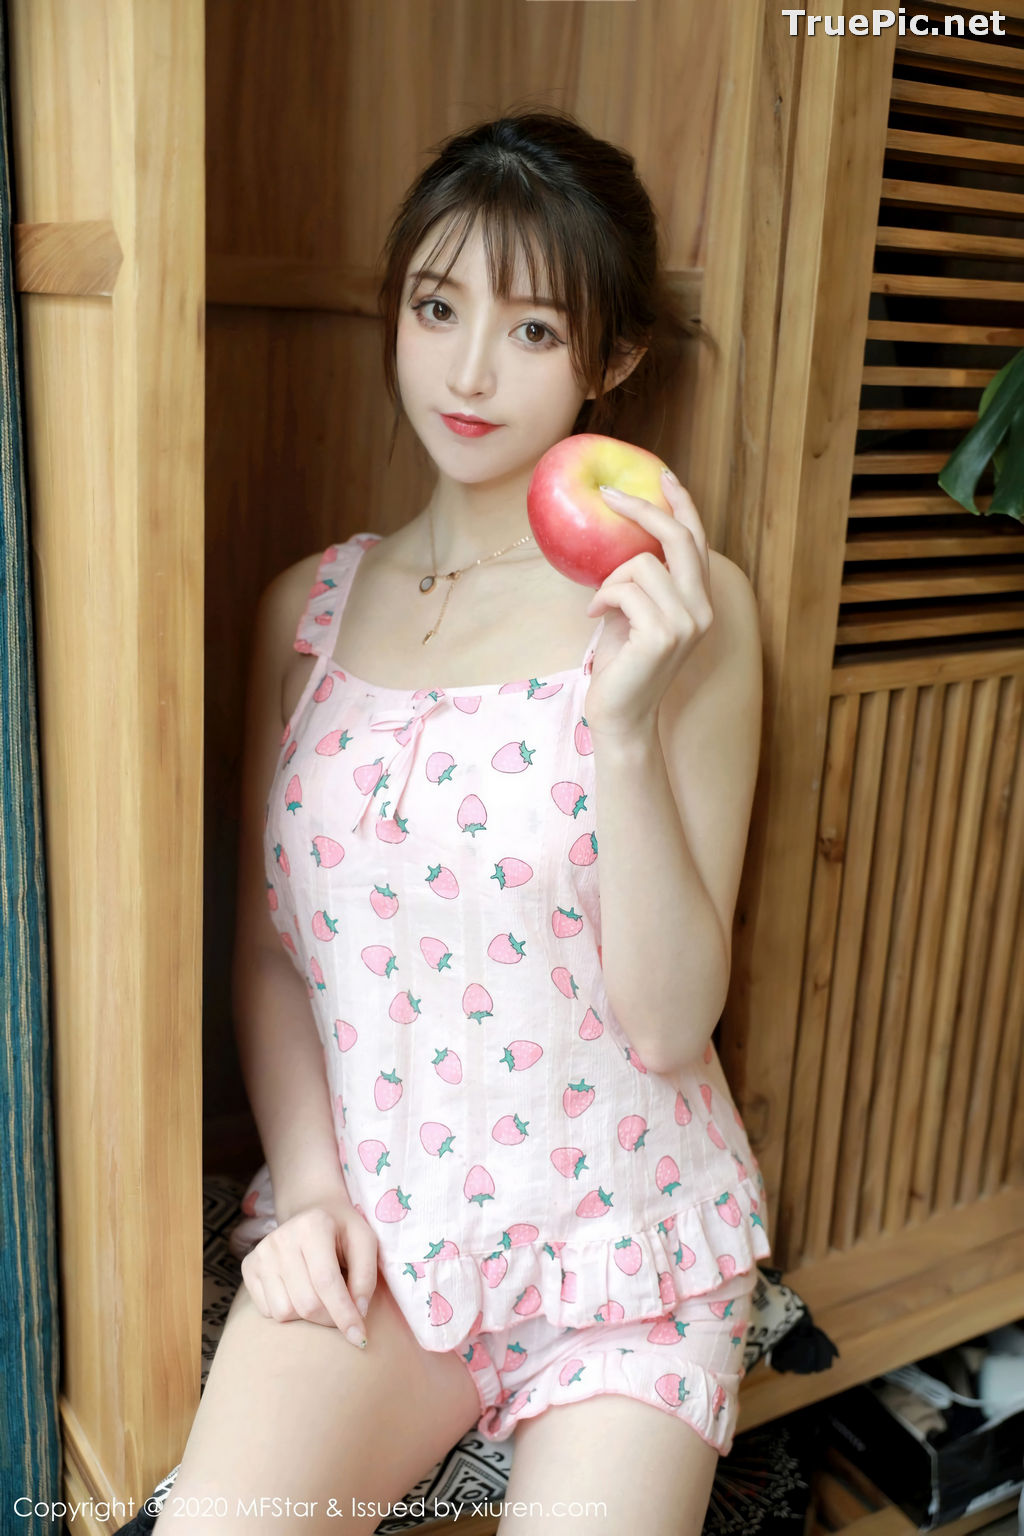 Image MFStar Vol.349 - Chinese Model Yoo优优 - Sexy and Cute Strawberry Girl - TruePic.net - Picture-27